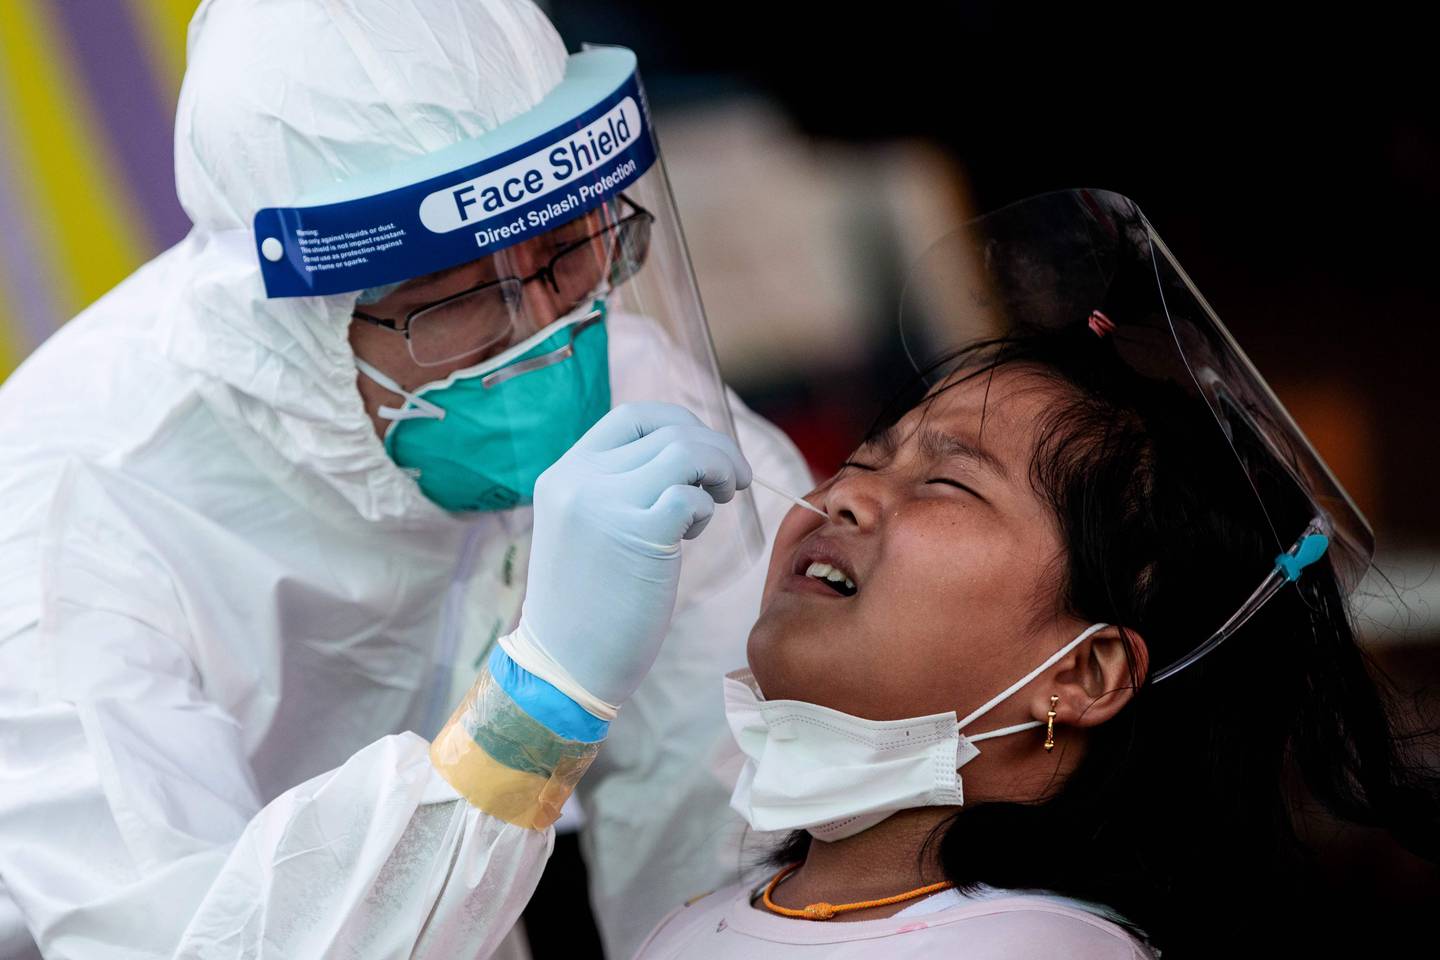 Medical officials conduct a nose swab test on a girl for the COVID-19 coronavirus at a seafood market in Samut Sakhon on December 19, 2020 after some new cases of local infections were detected and linked to a vendor at the market. (Photo by Jack TAYLOR / AFP)